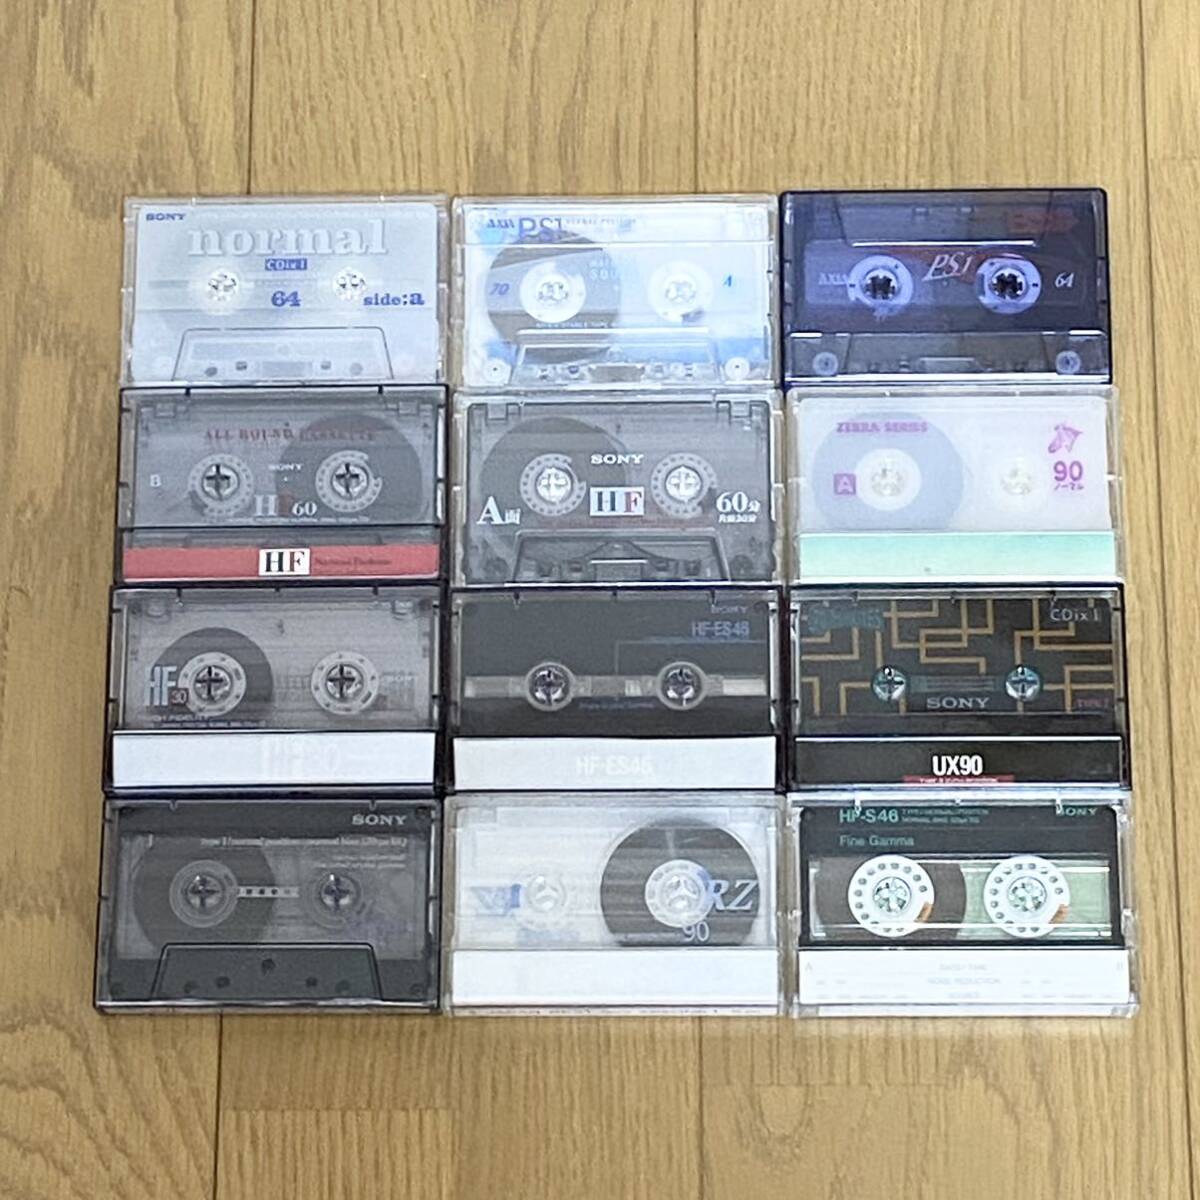  cassette tape recording ending used . large amount together 14 2 ps mak cell AXIA SONY other 